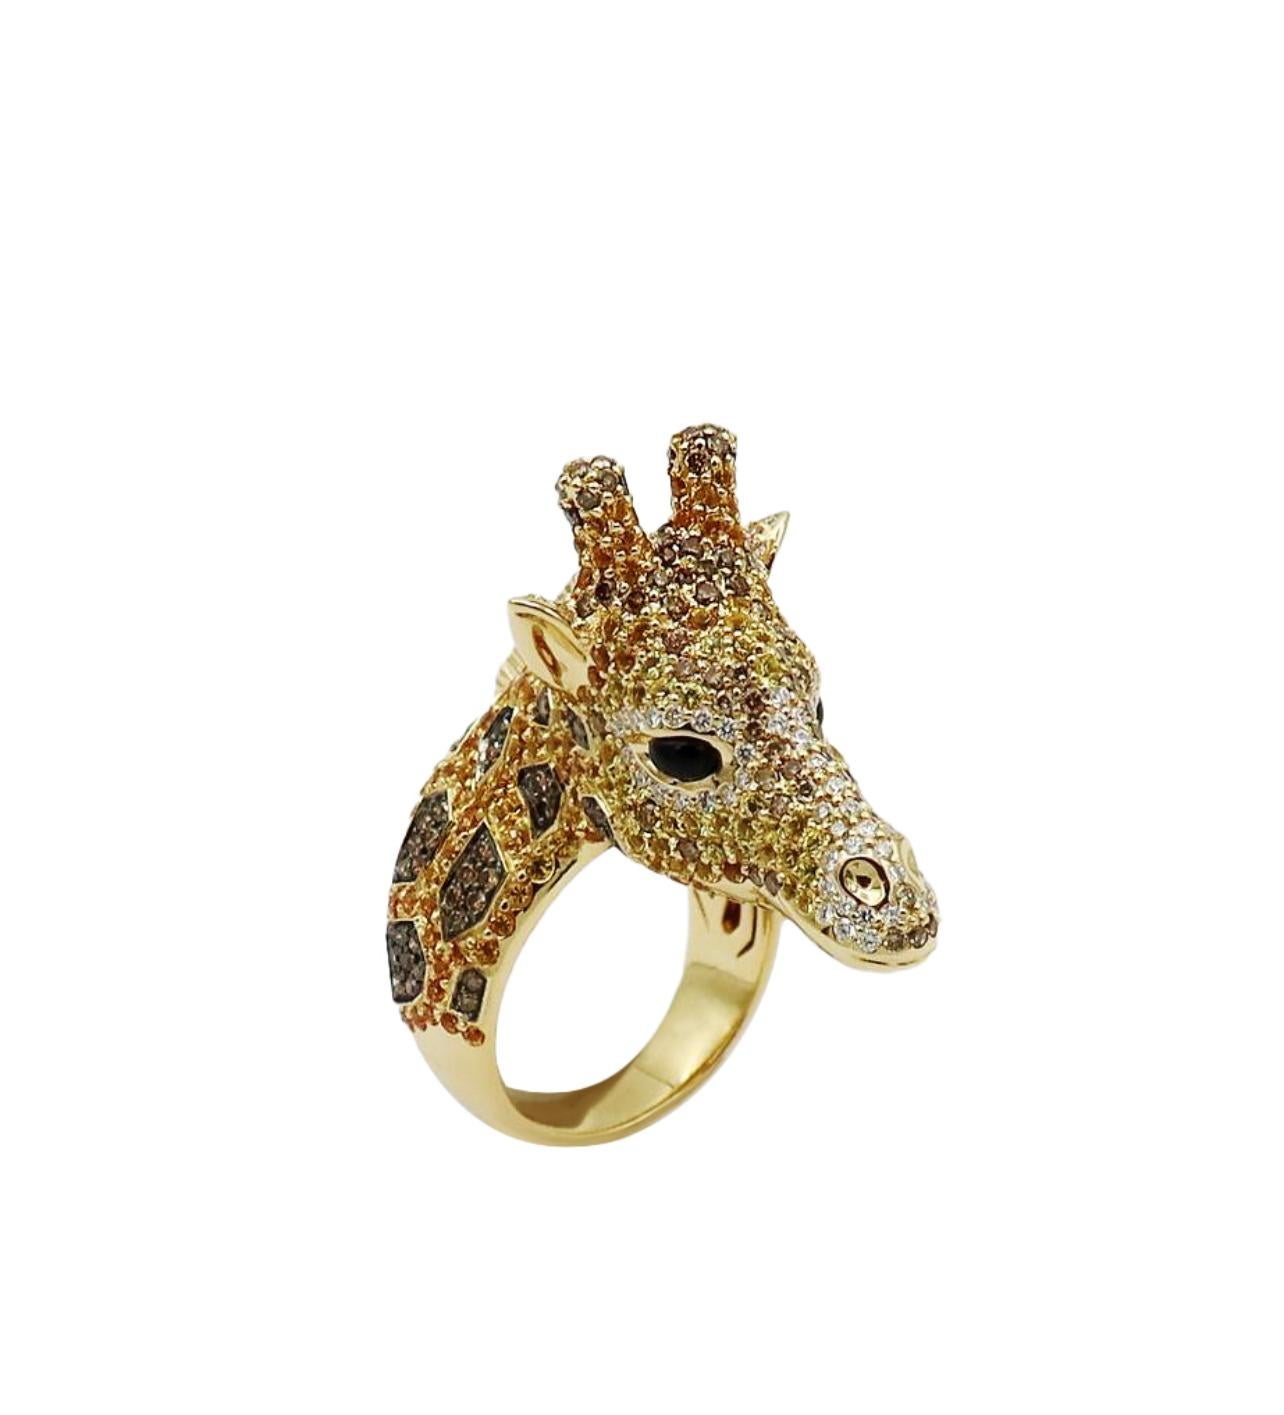 Ring 18K Yellow Gold
Brown Diamond
Diamond
Onyx Eyes
Yellow Sapphire

It was no-one other then Maria Félix who created the trend of crocodile jewellery and made it a classic. In 1975 Félix commissioned her most exceptional reptile jewel, a